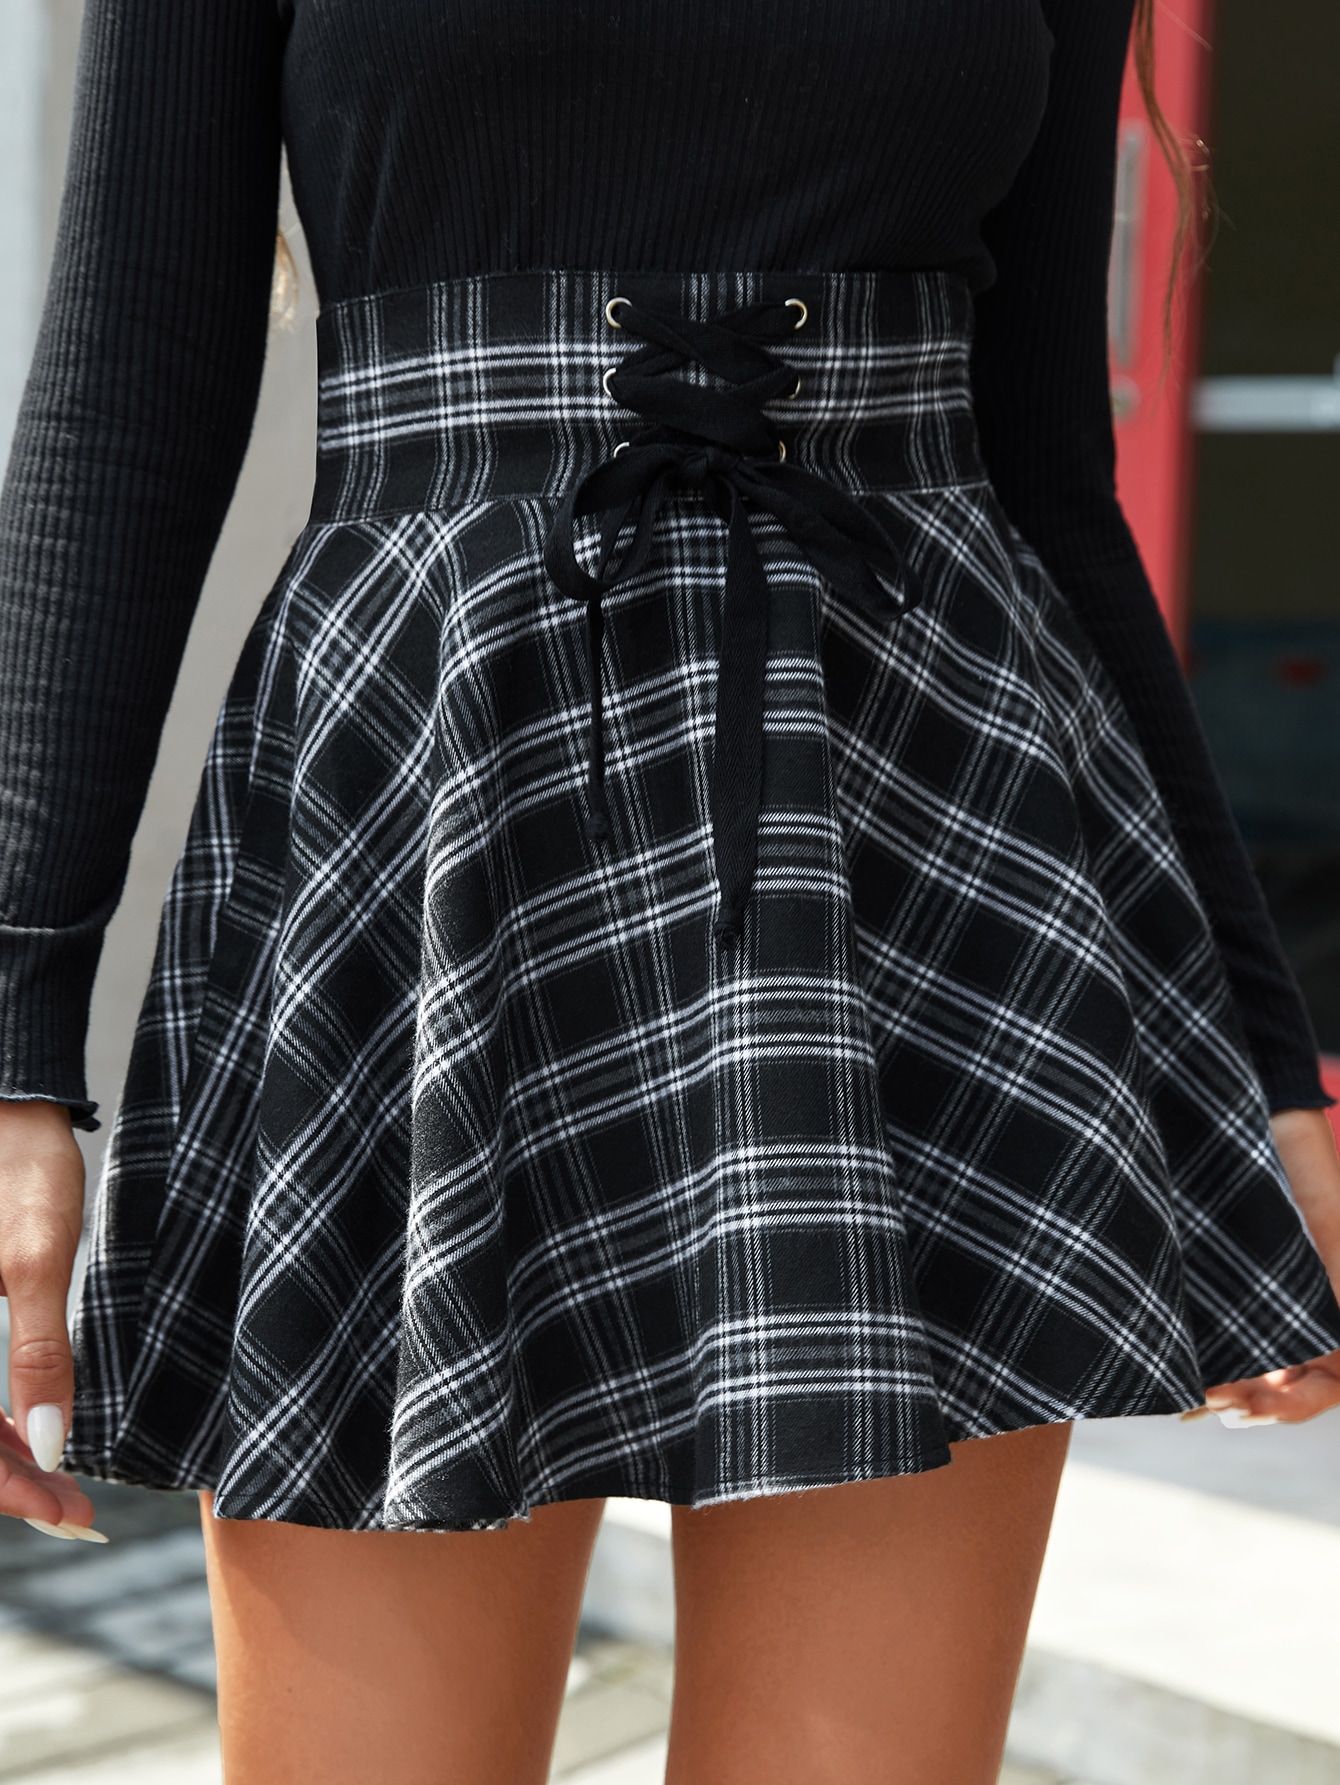 Make your style with black and white skirts